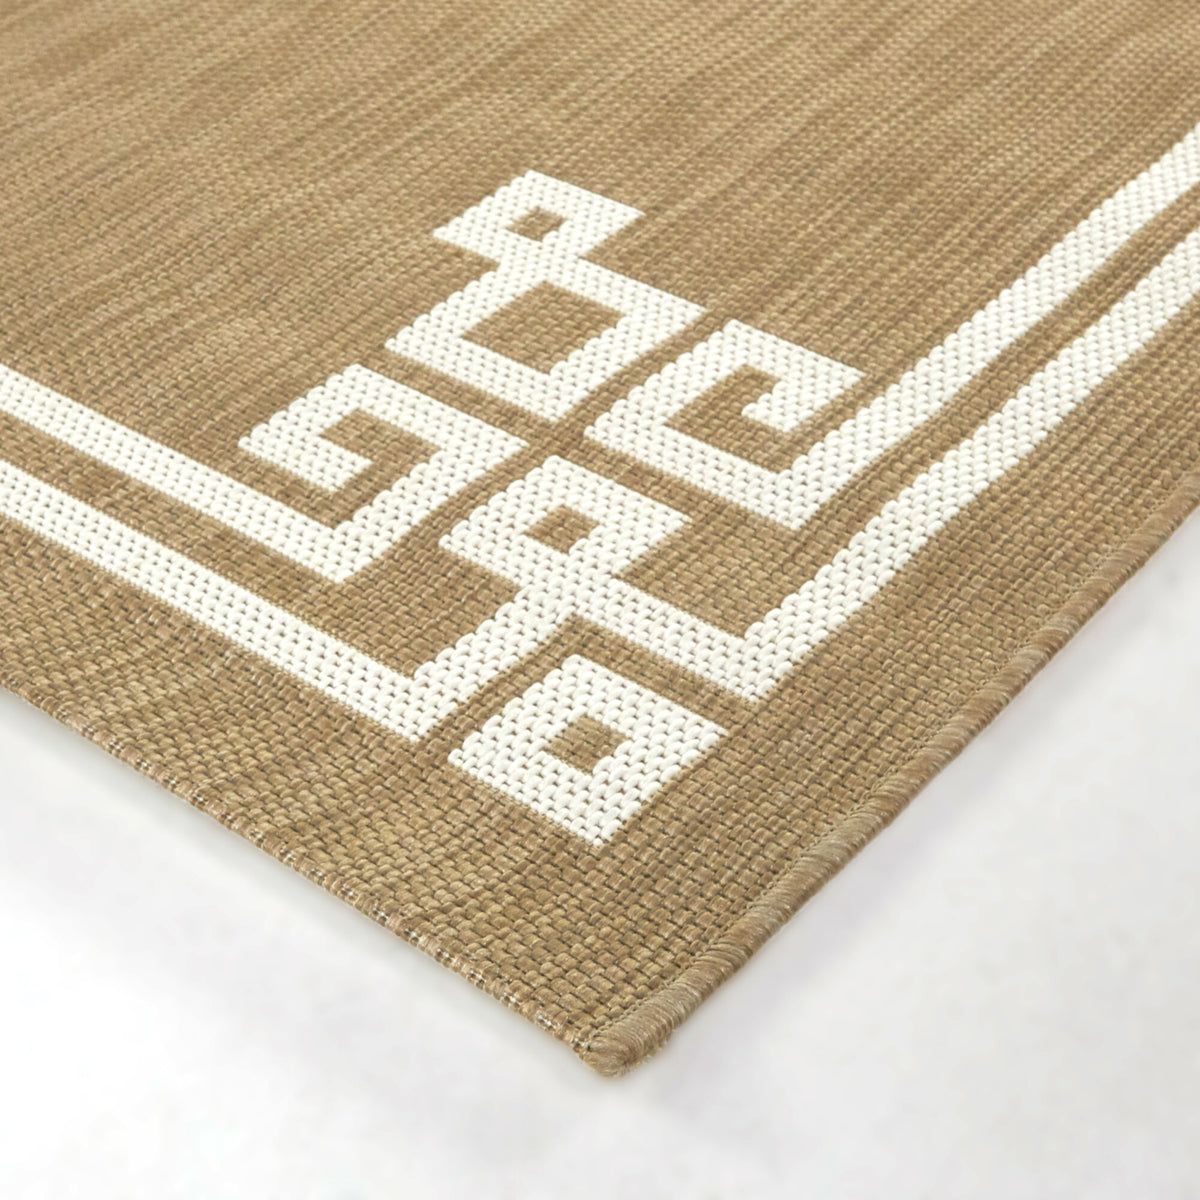 Haines Transitional Border Area Rug